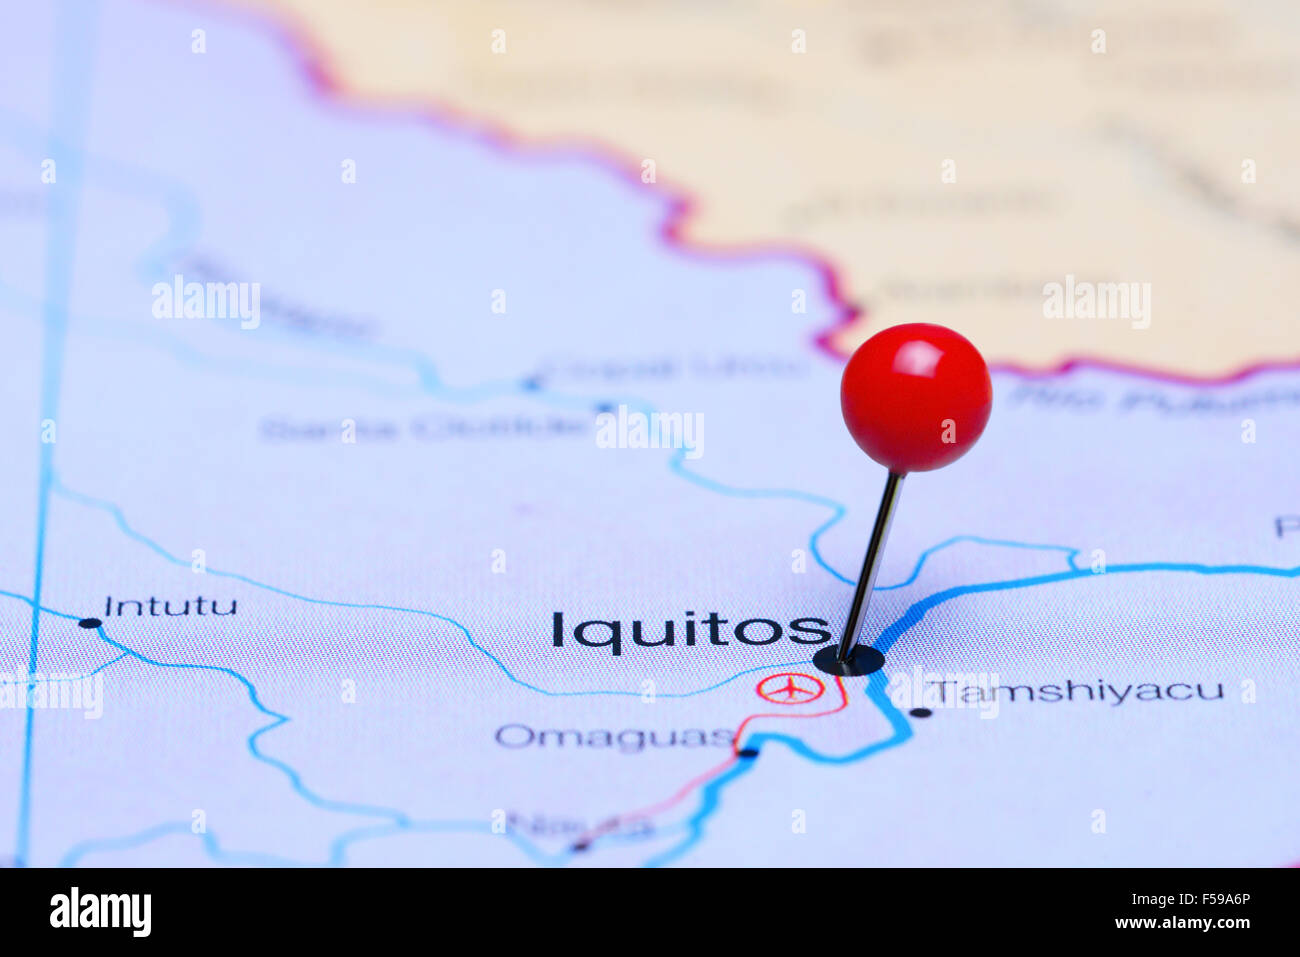 Iquitos pinned on a map of America Stock Photo